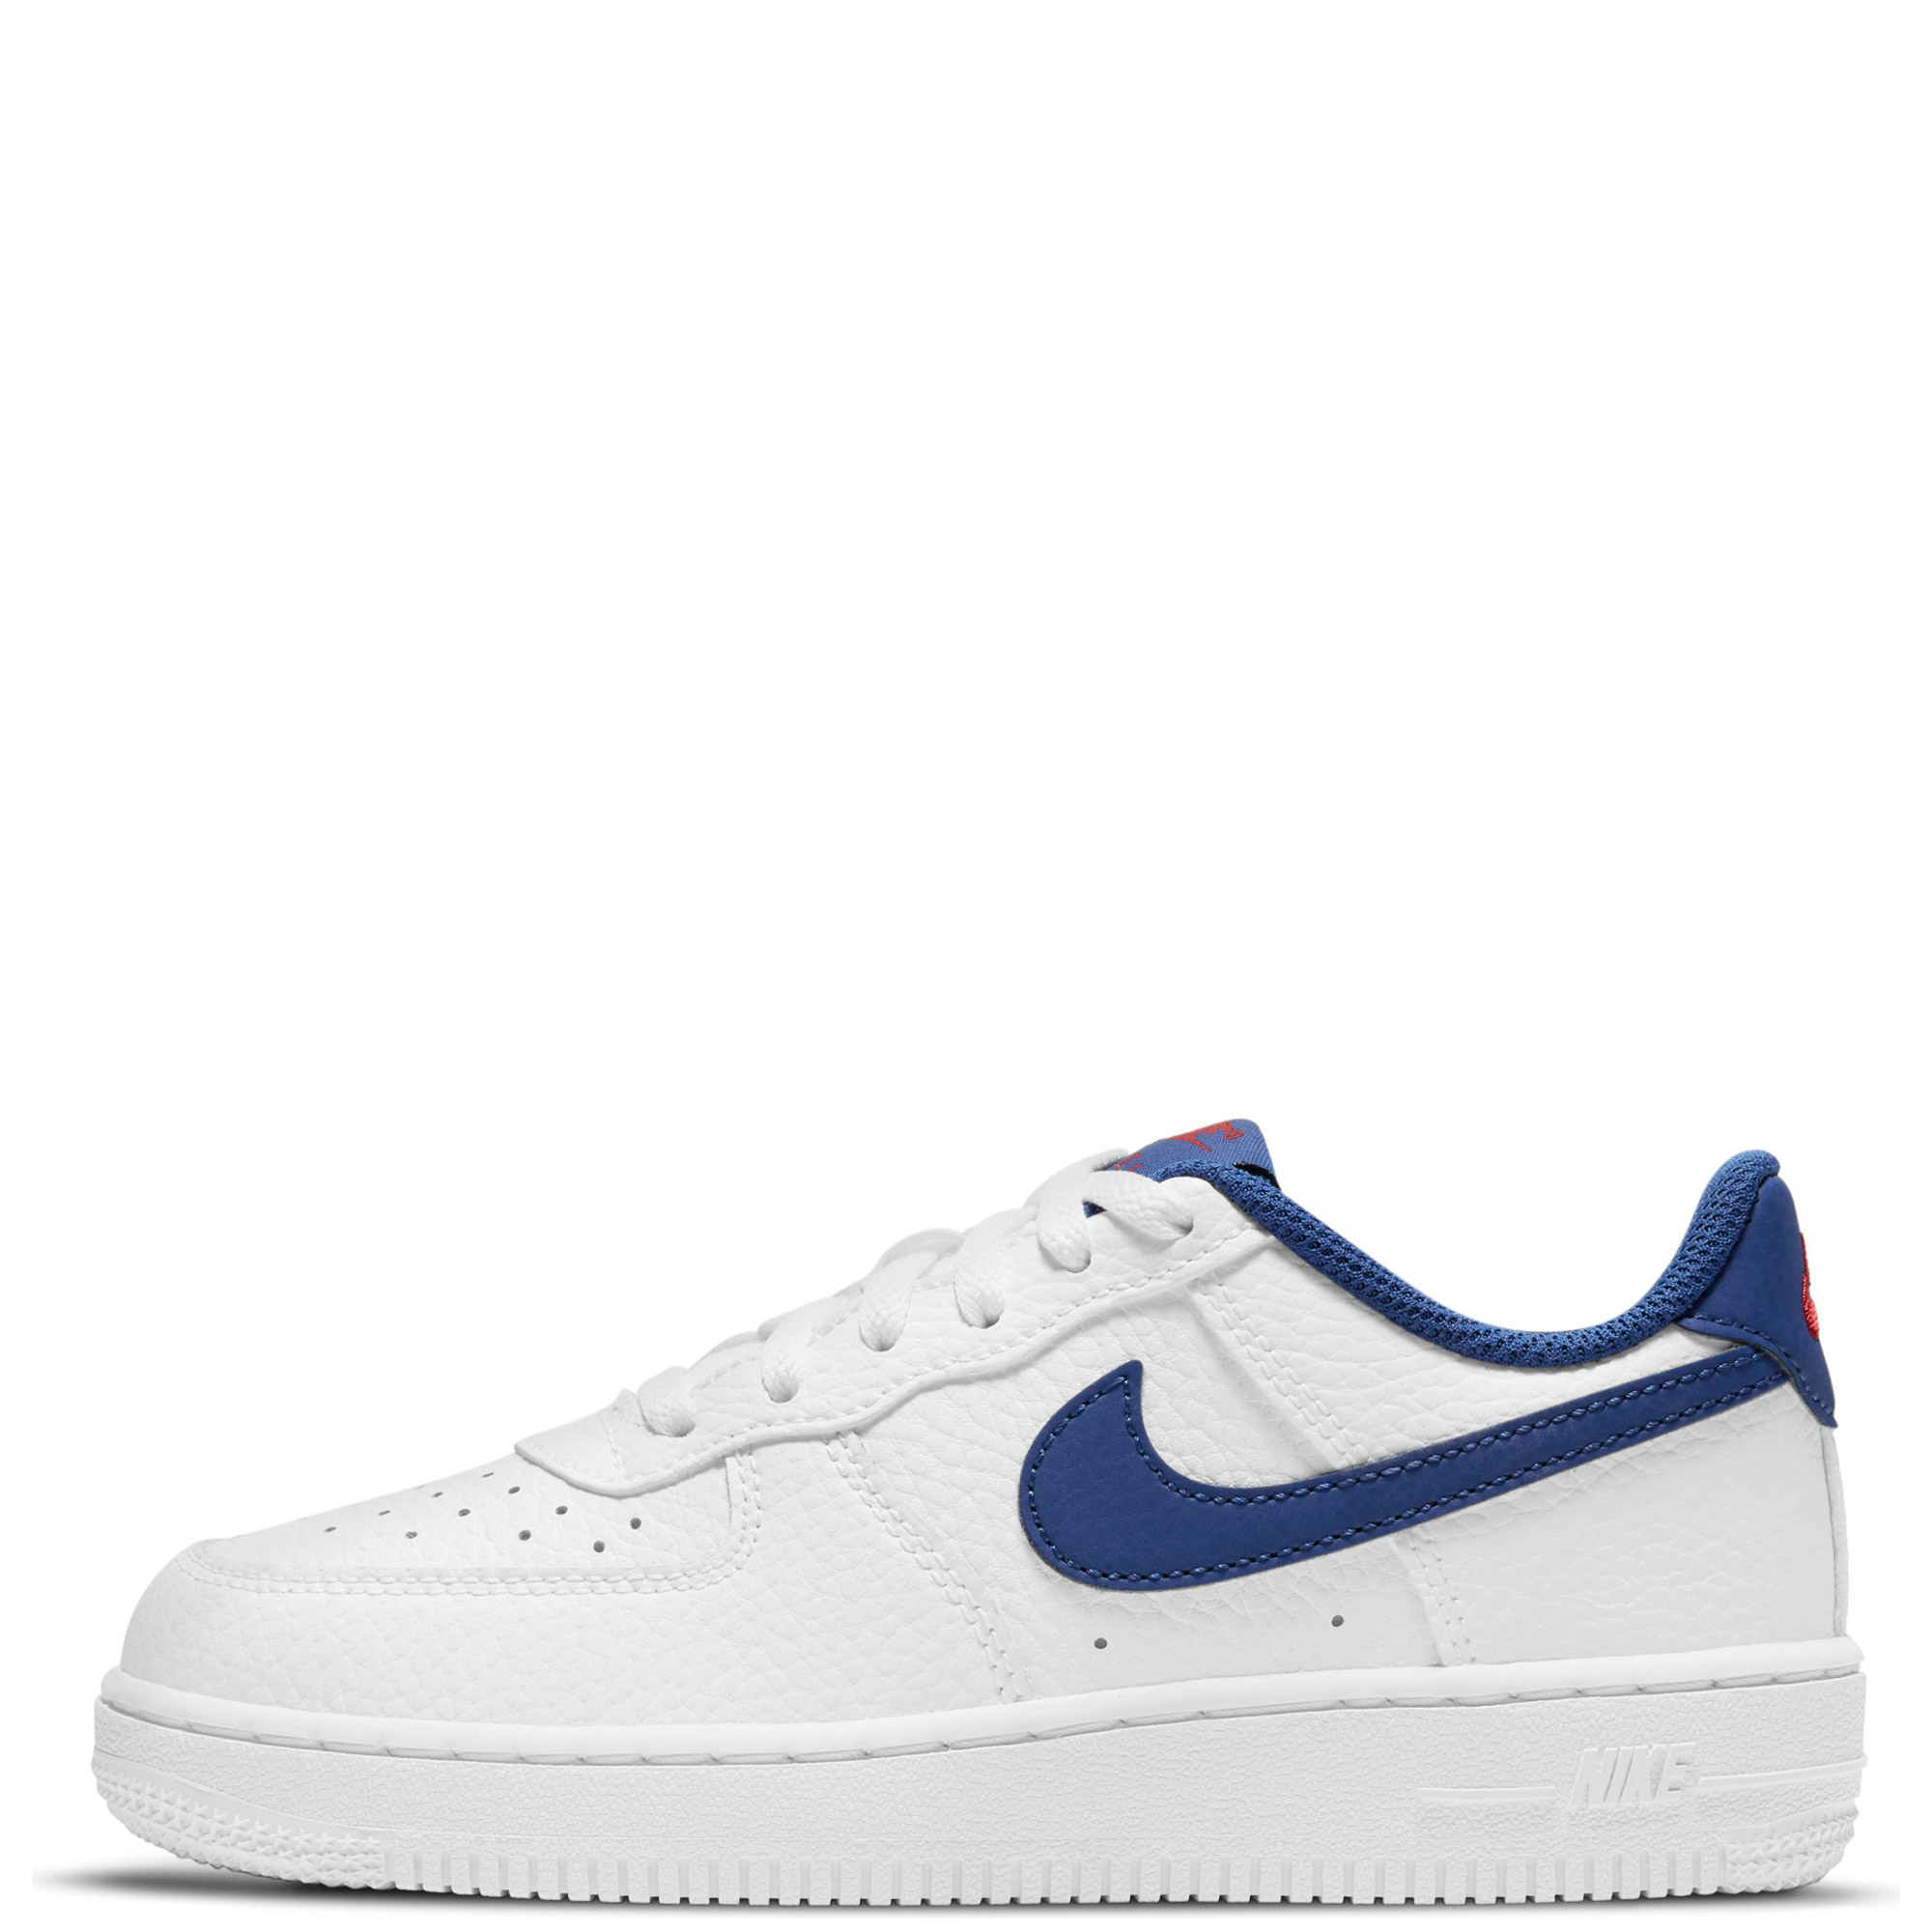 Nike Air Force 1 LV8 3 (PS) Little Kids Basketball Shoes Size 1.5